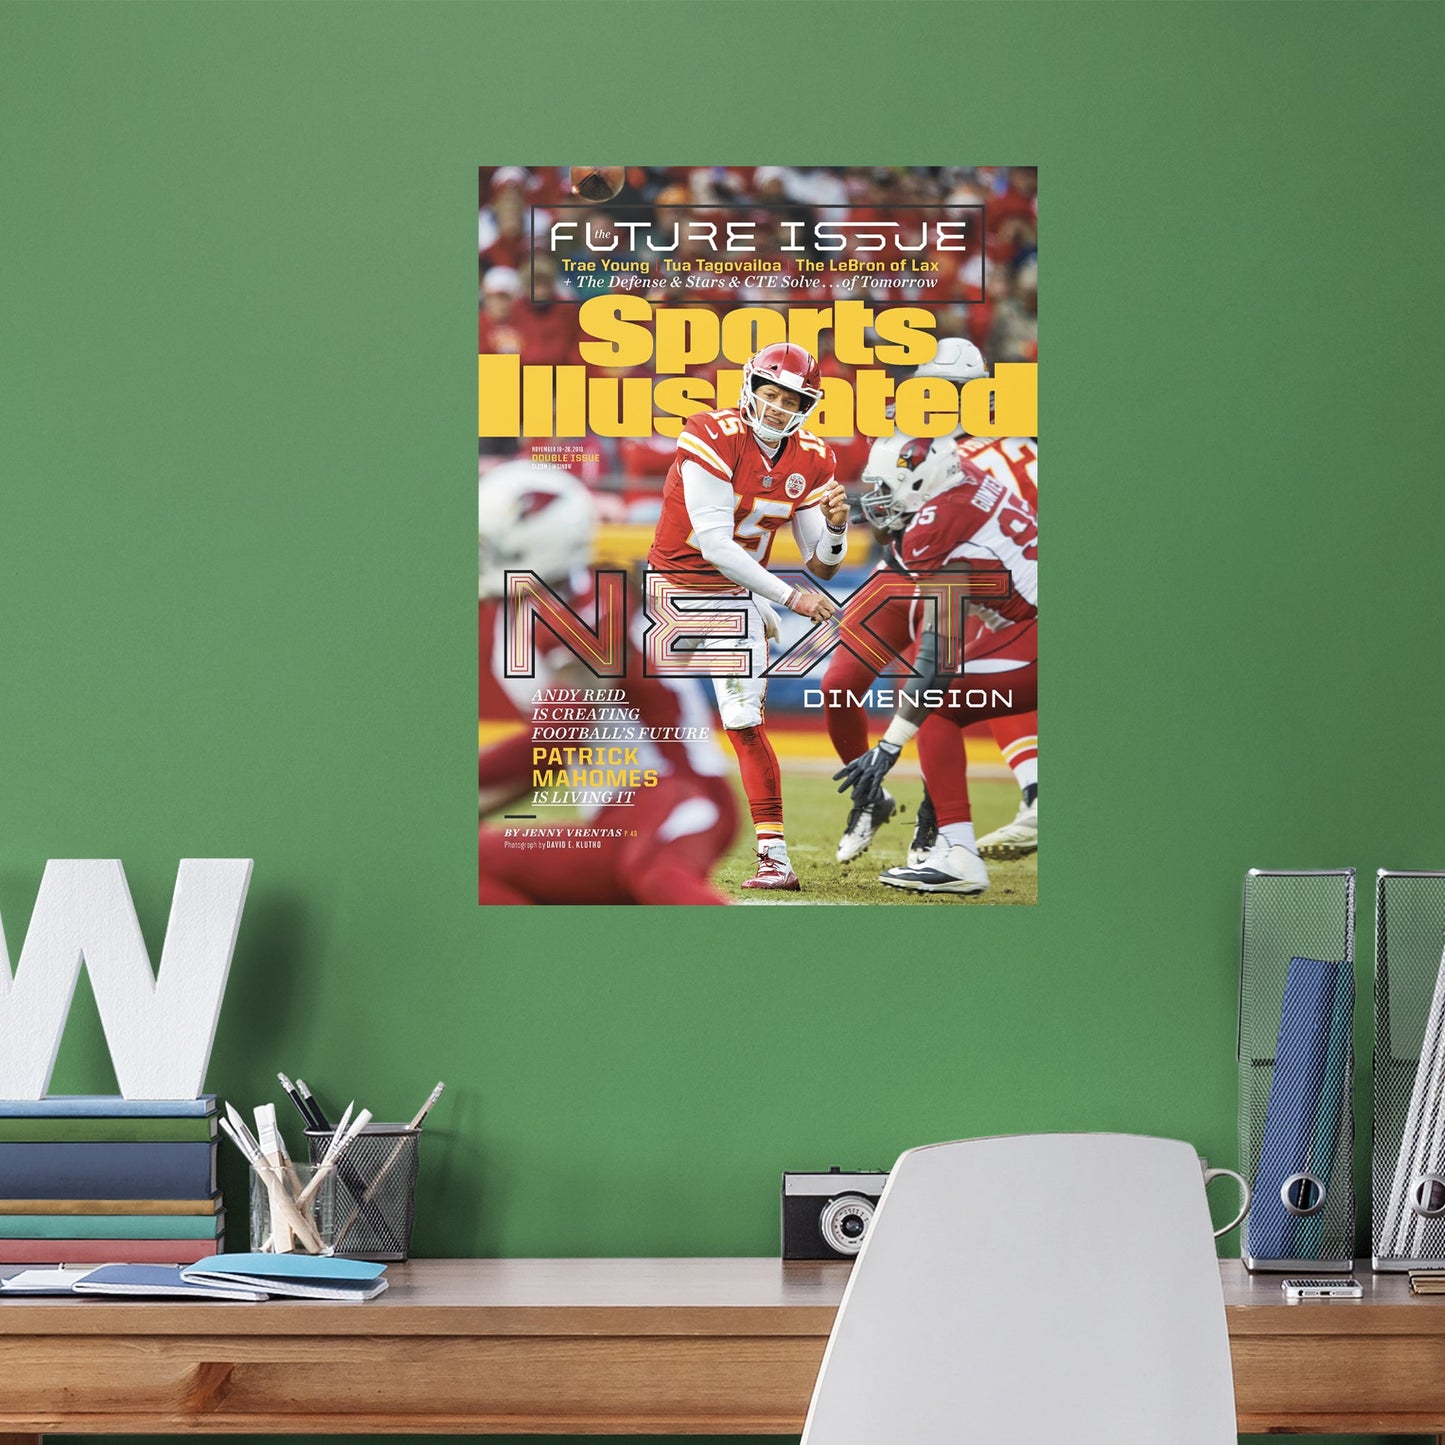 Kansas City Chiefs: Patrick Mahomes II Future Issue November 2018 Sports Illustrated Cover - Officially Licensed NFL Removable Adhesive Decal